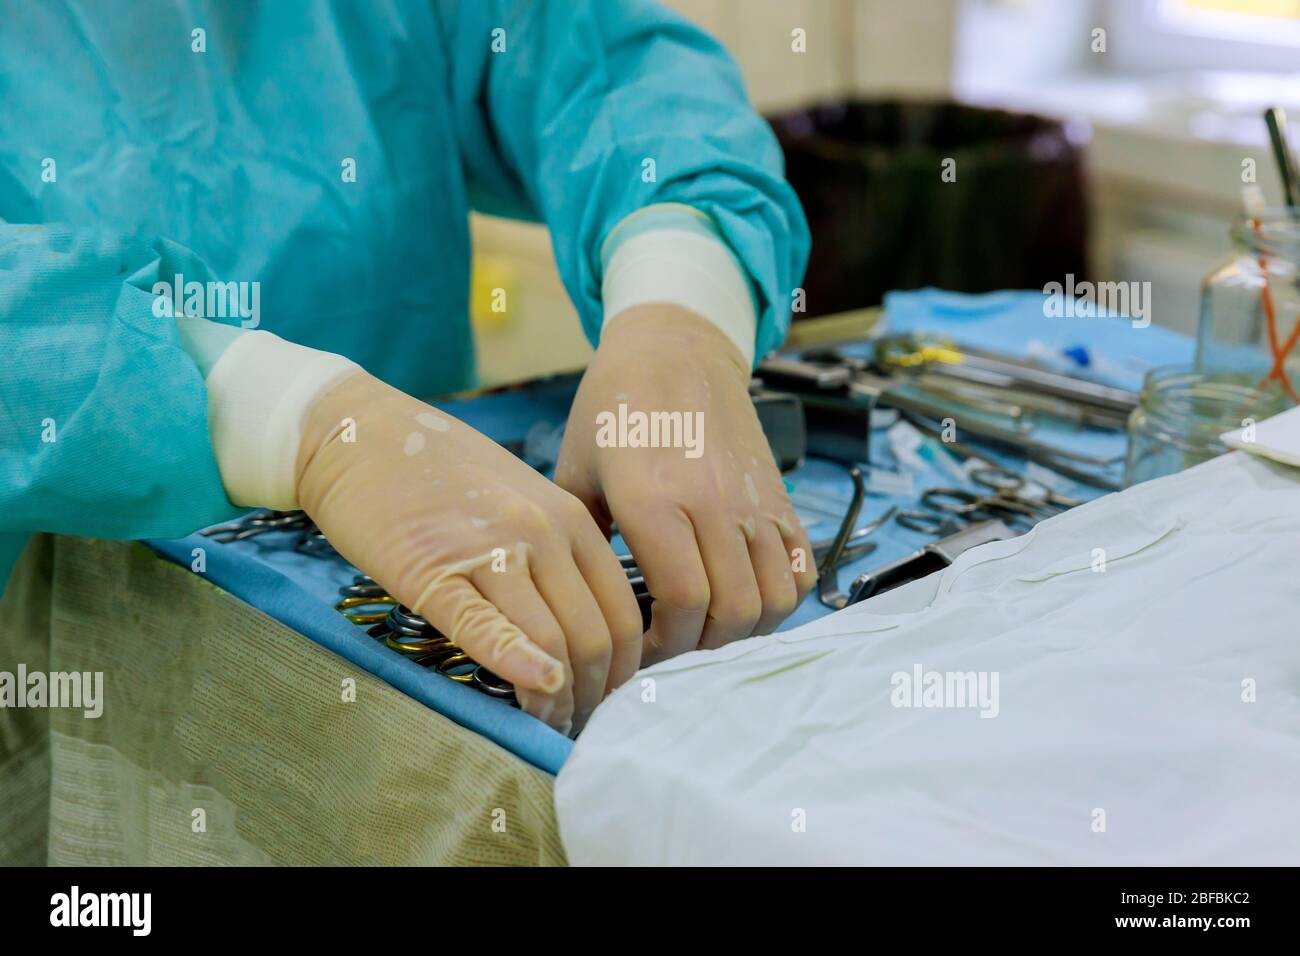 Surgery and emergency operation room with his team with medical tools for surgery Stock Photo